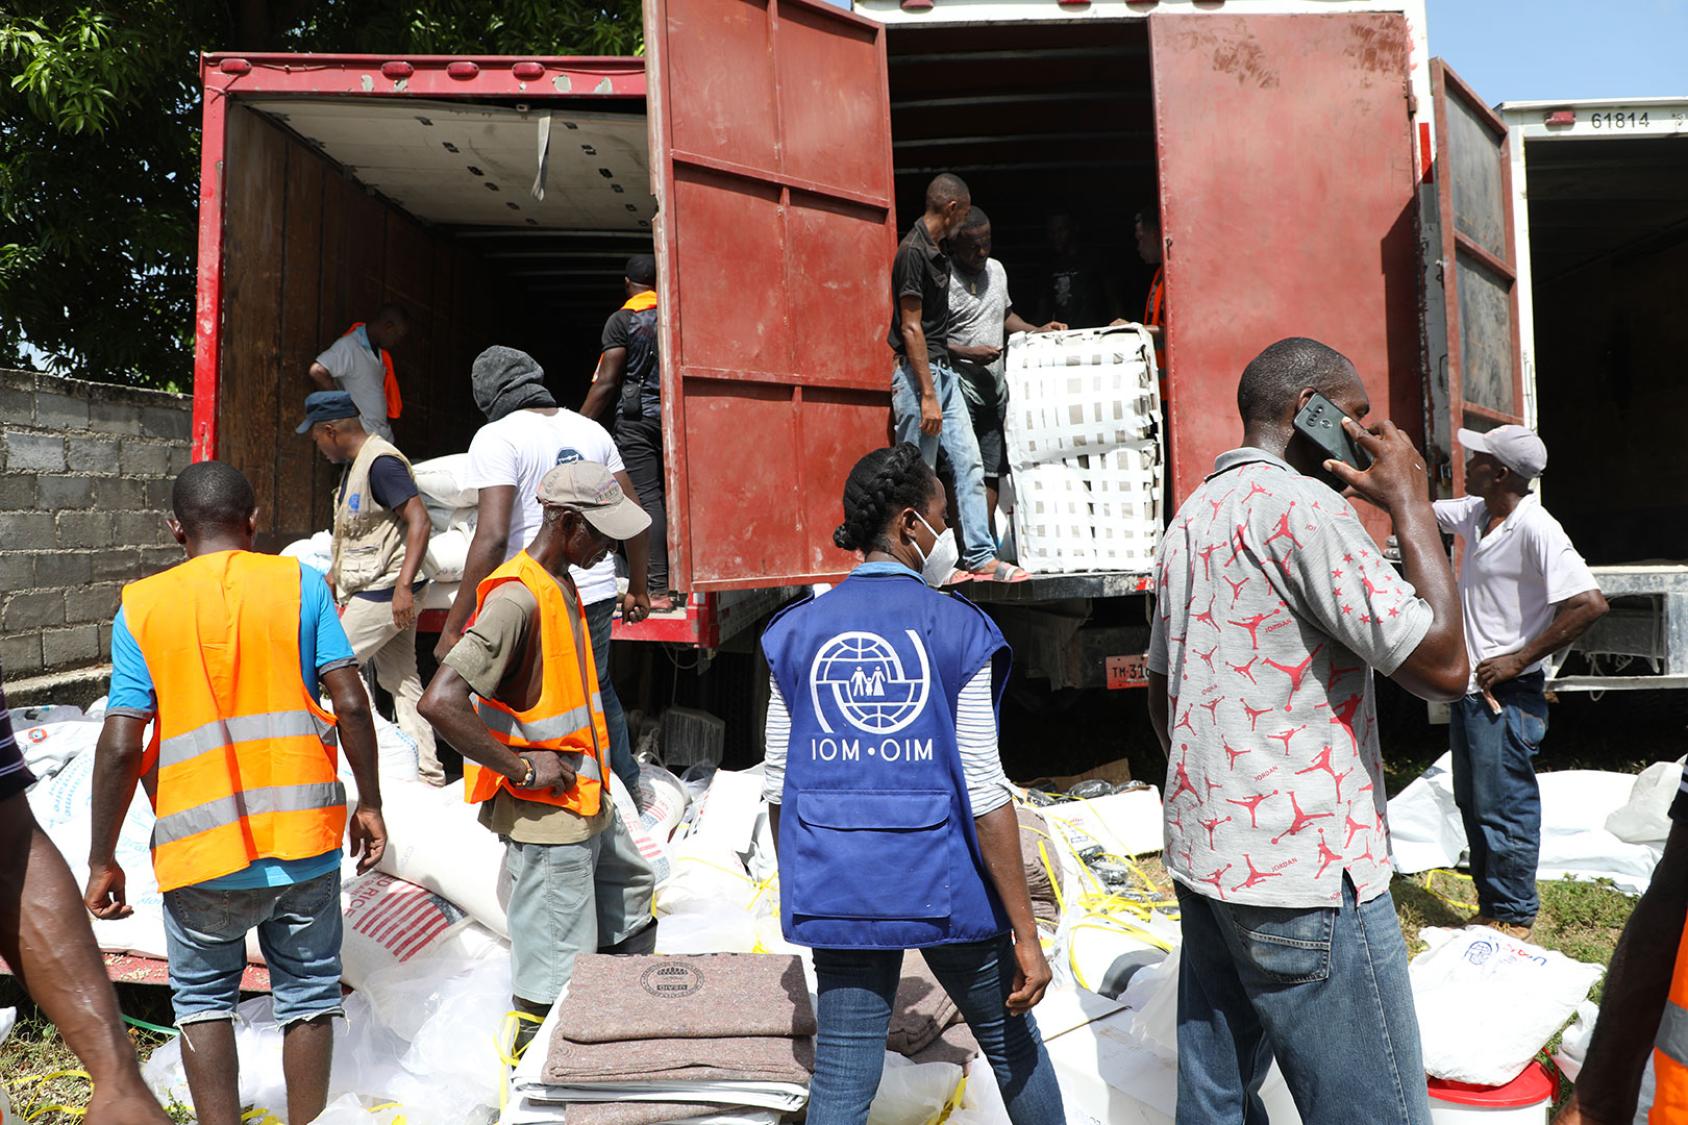 Several people work together to unload humanitarian aid from two large container trucks.